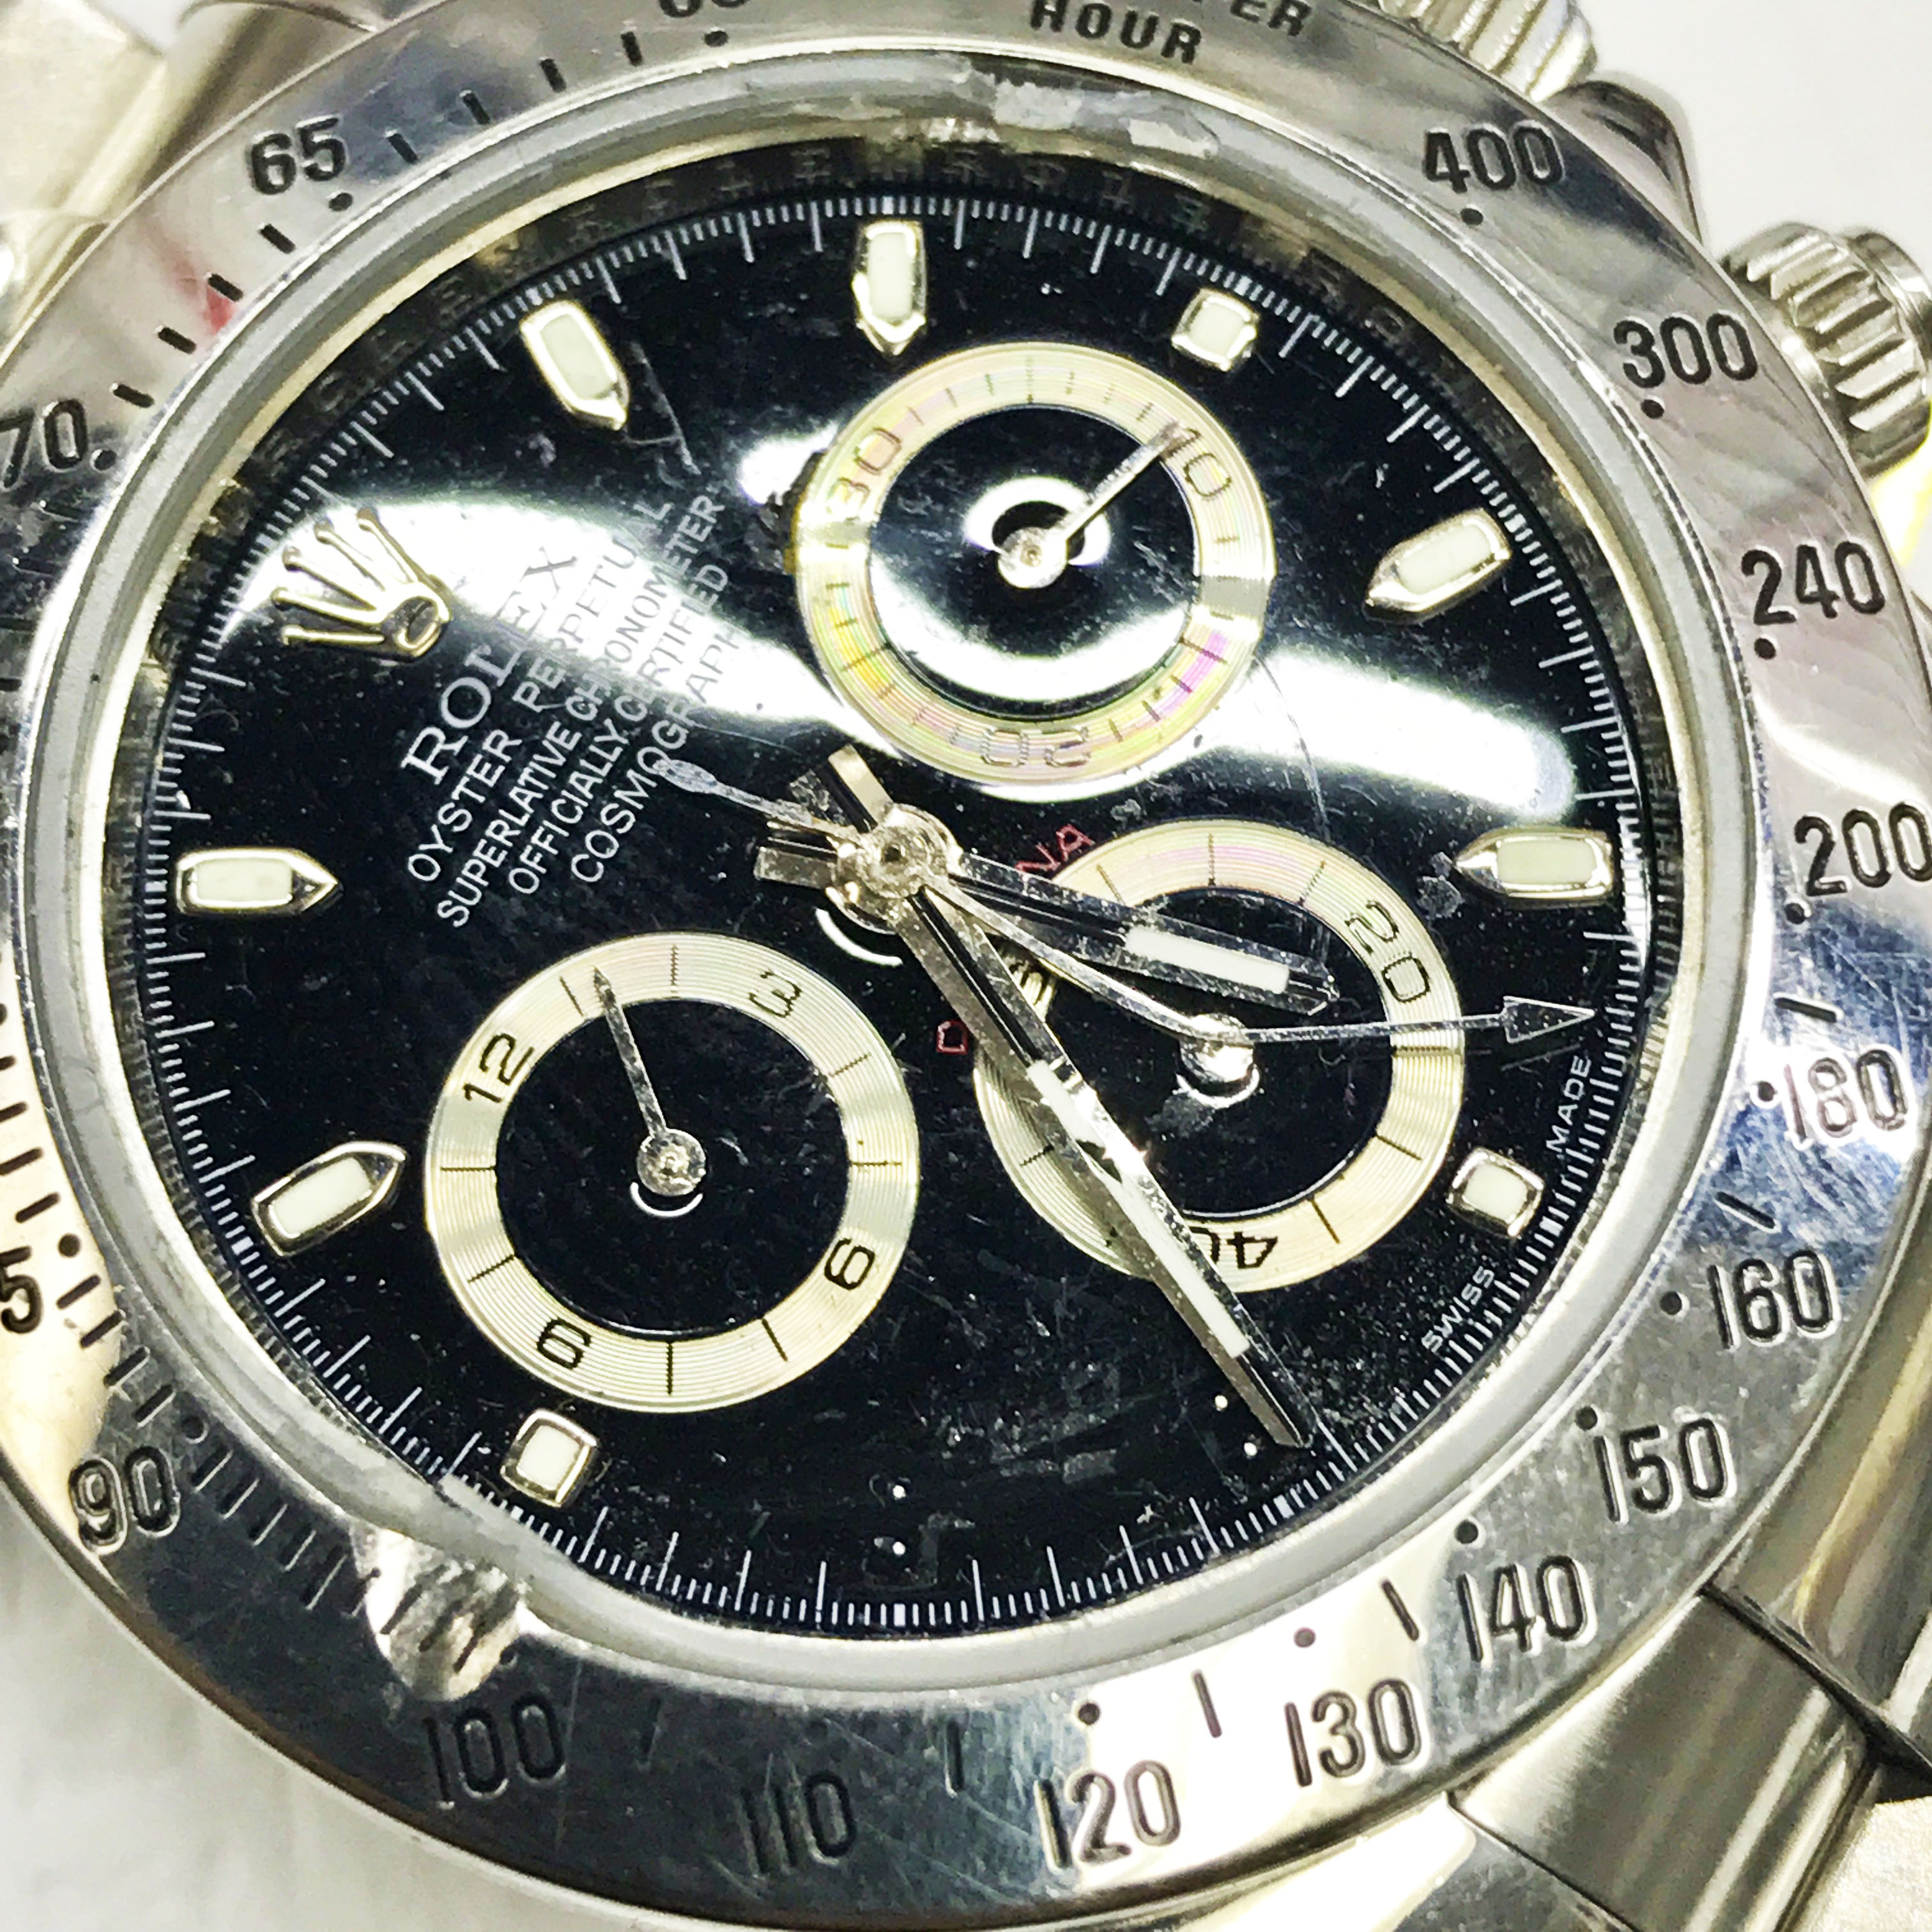 Not All Rolex Repair Stories Have Happy Endings | The Watch Buyers Group